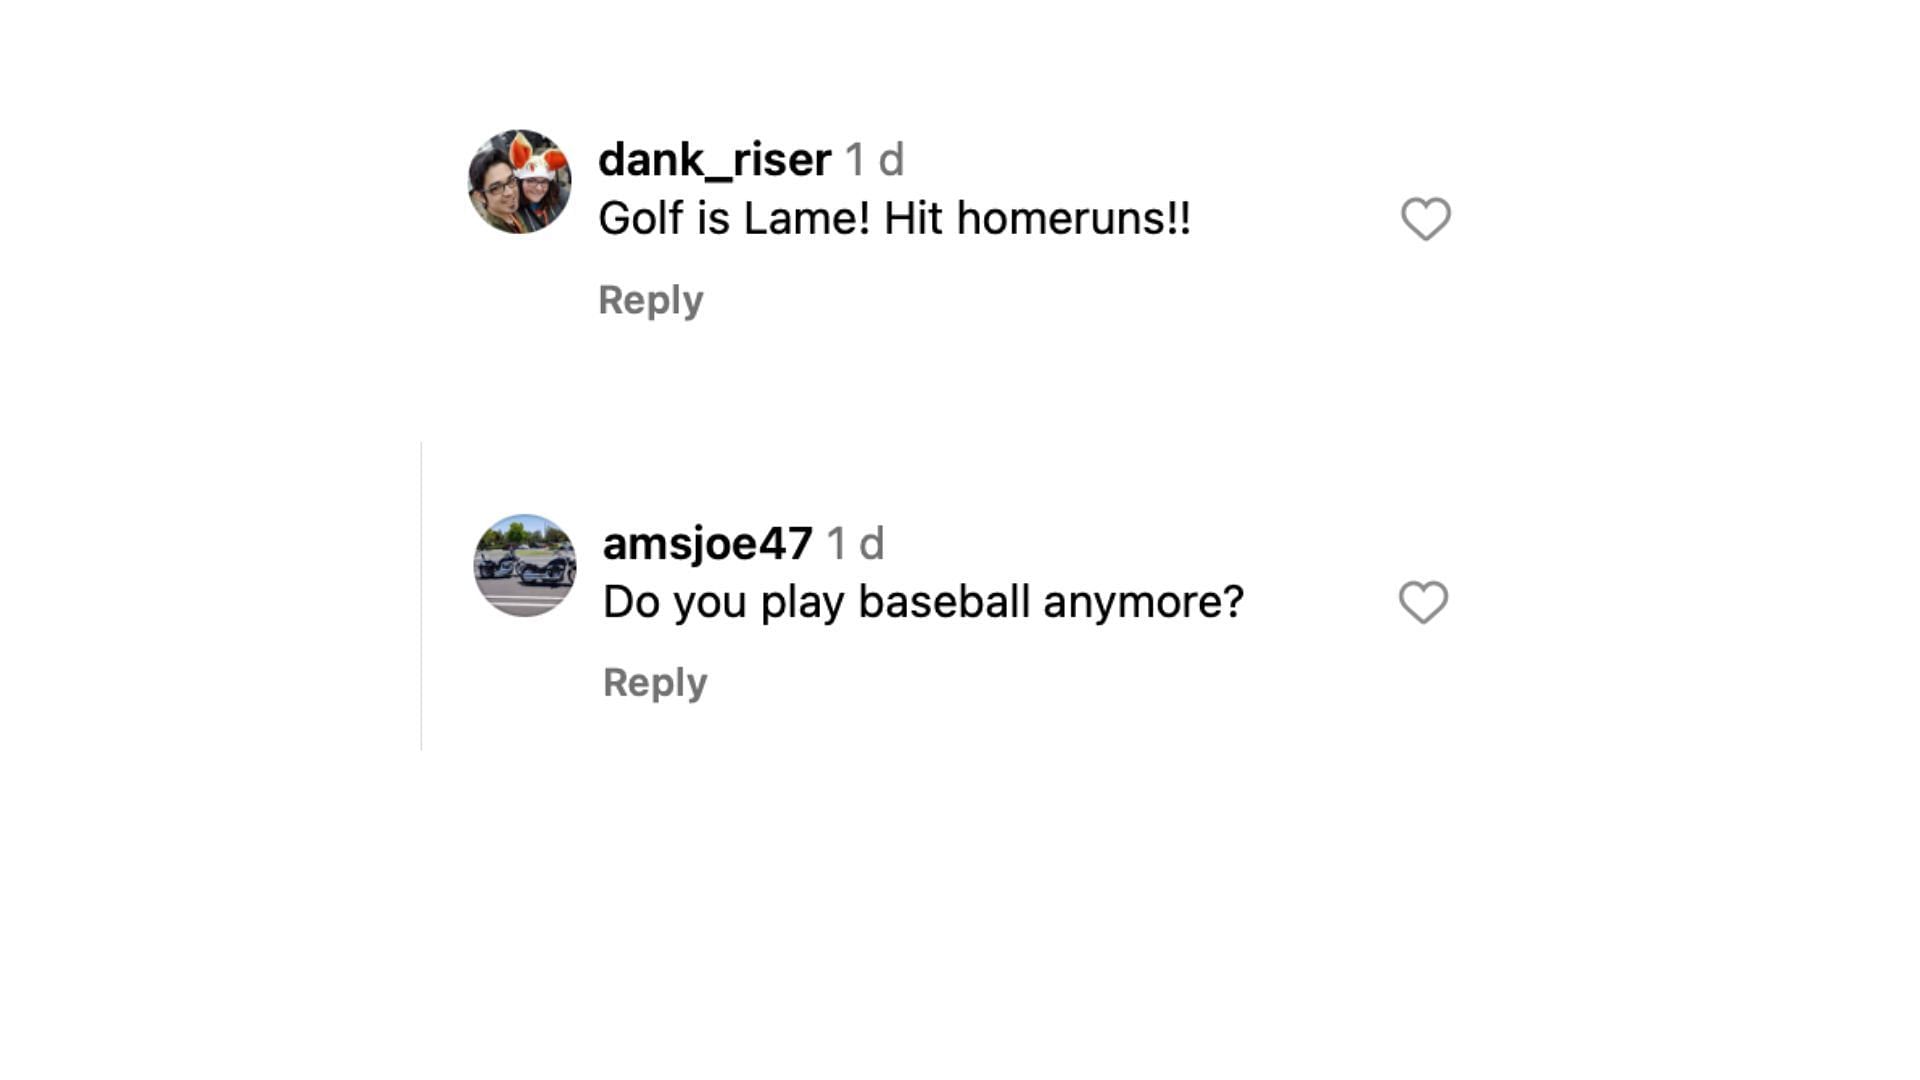 Comments from Instagram